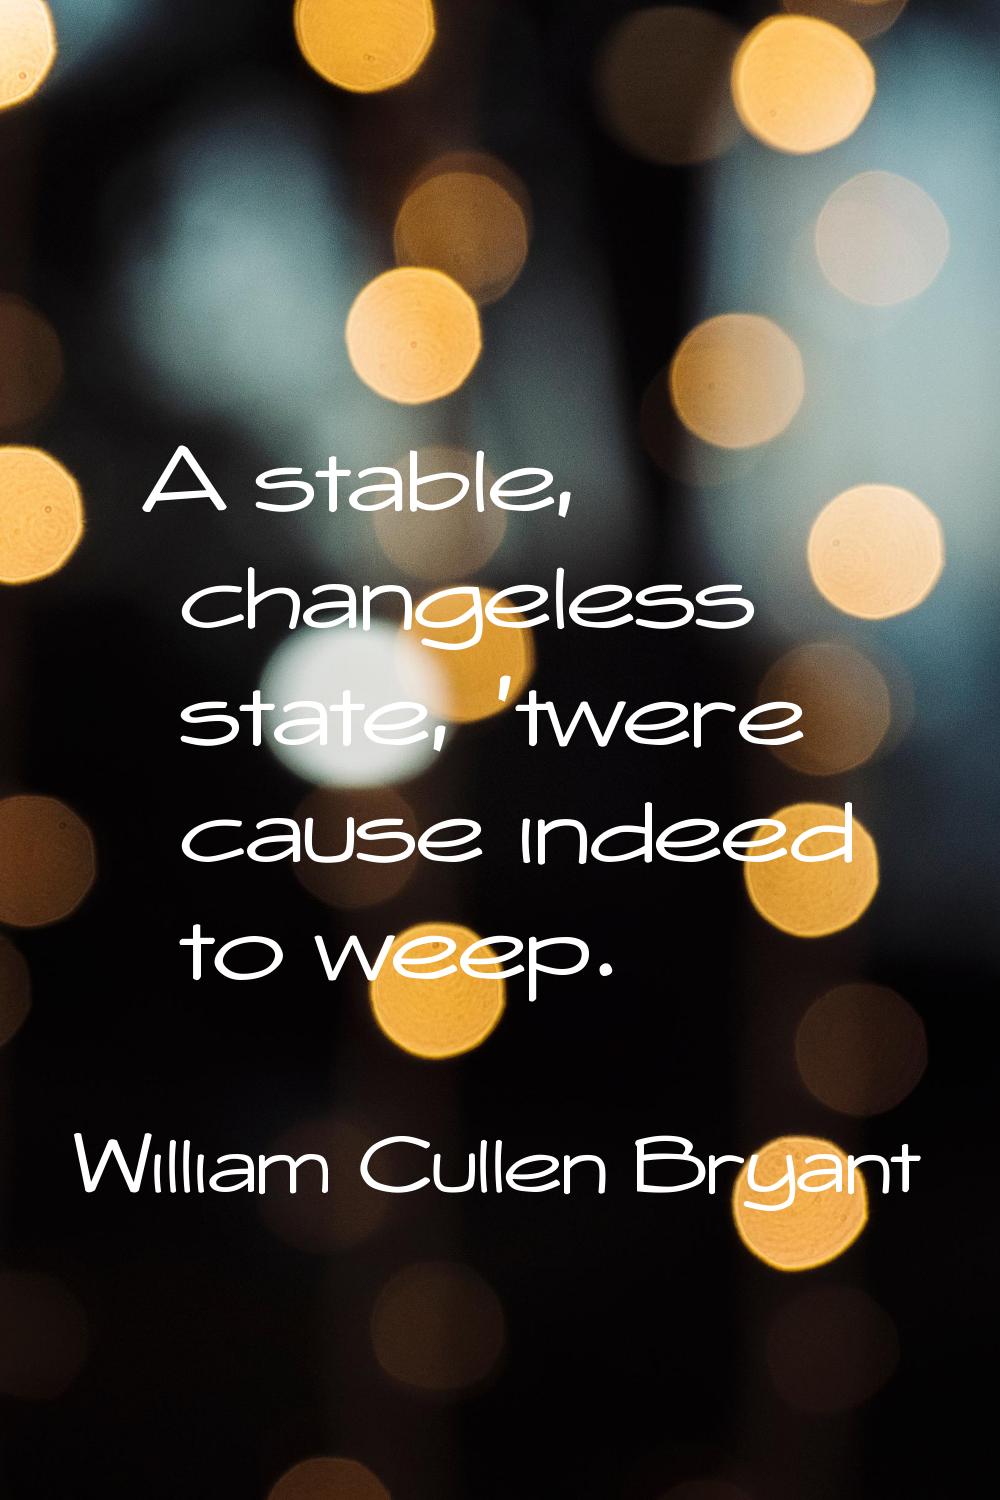 A stable, changeless state, 'twere cause indeed to weep.